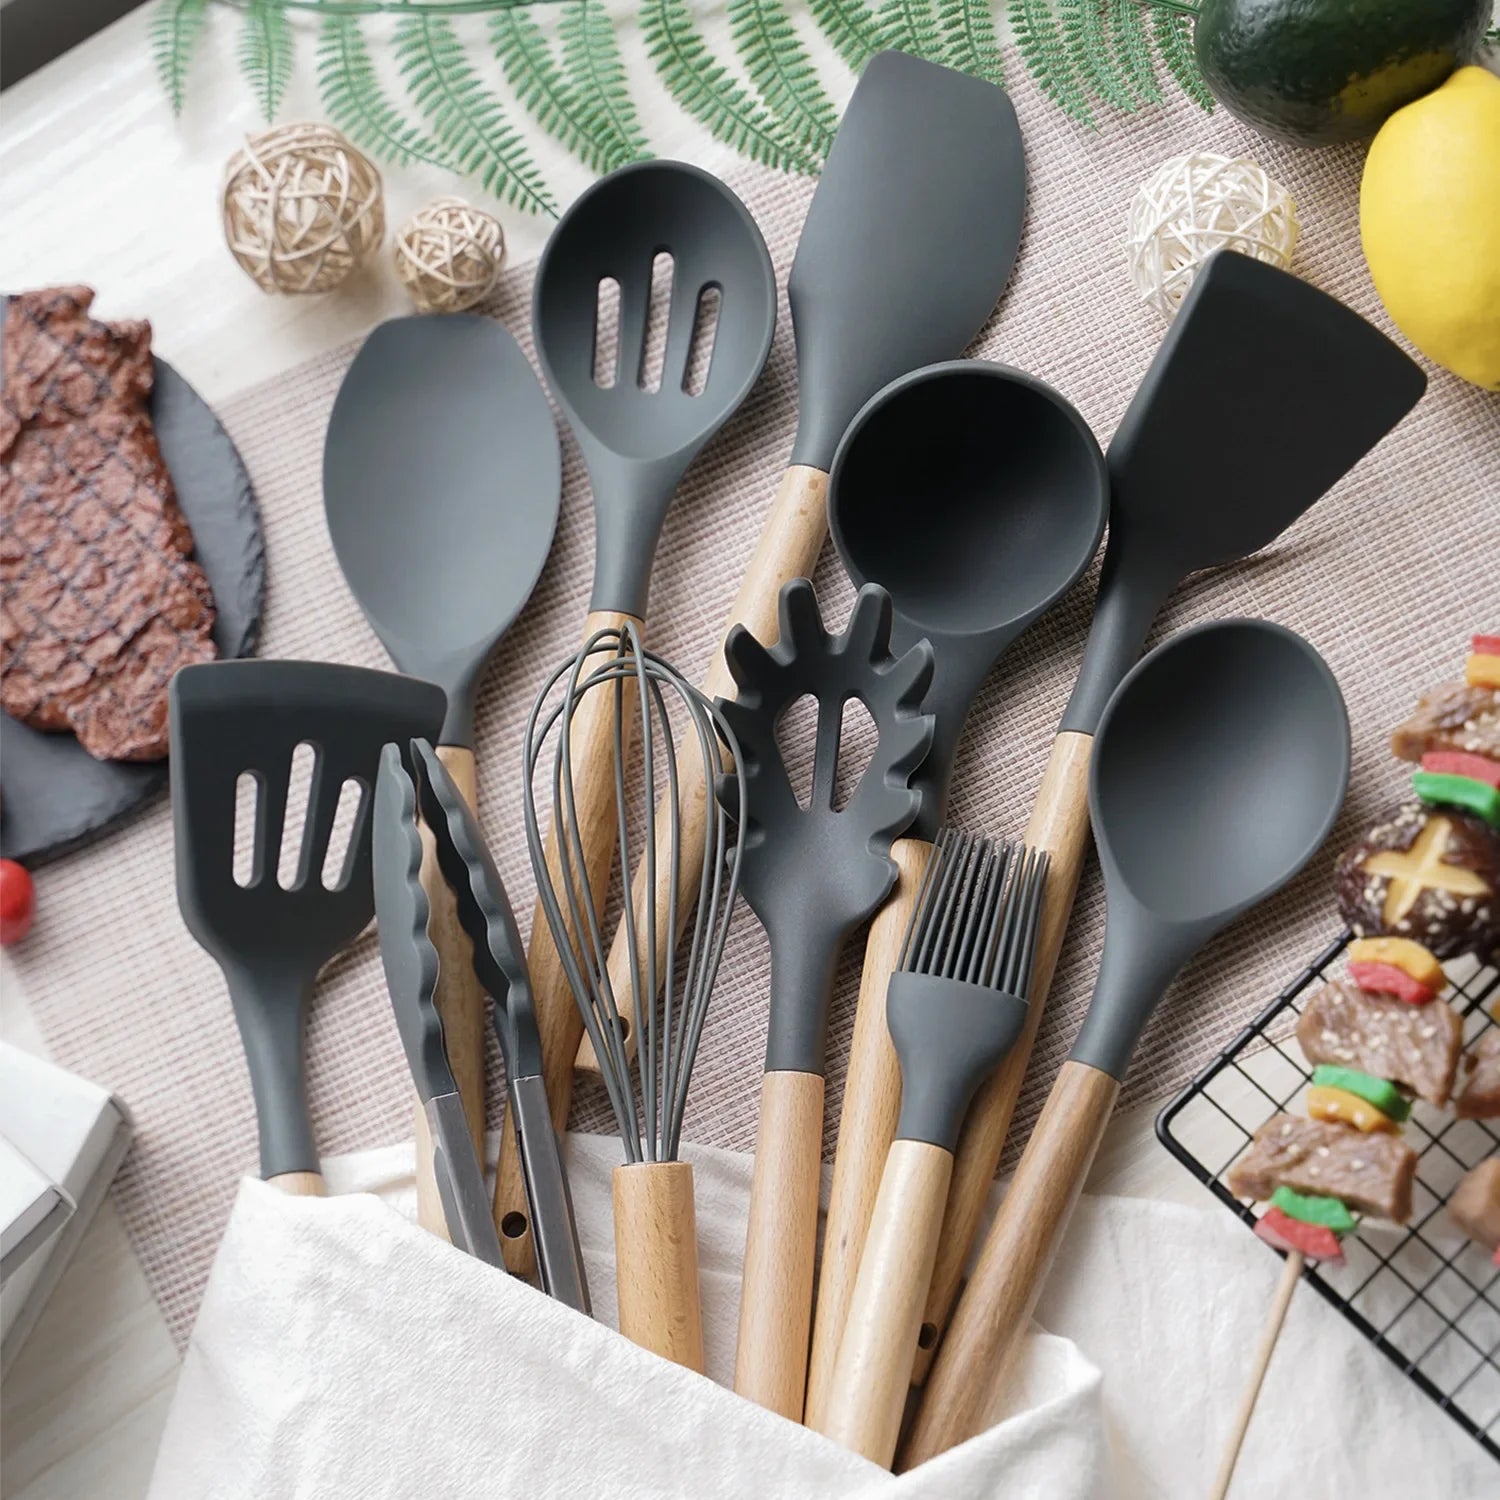 12Pcs Non-Stick Silicone Kitchenware Cookware Kitchen Utensils Set Spatula Shovel Egg Beaters Wooden Handle Cooking Tool Set